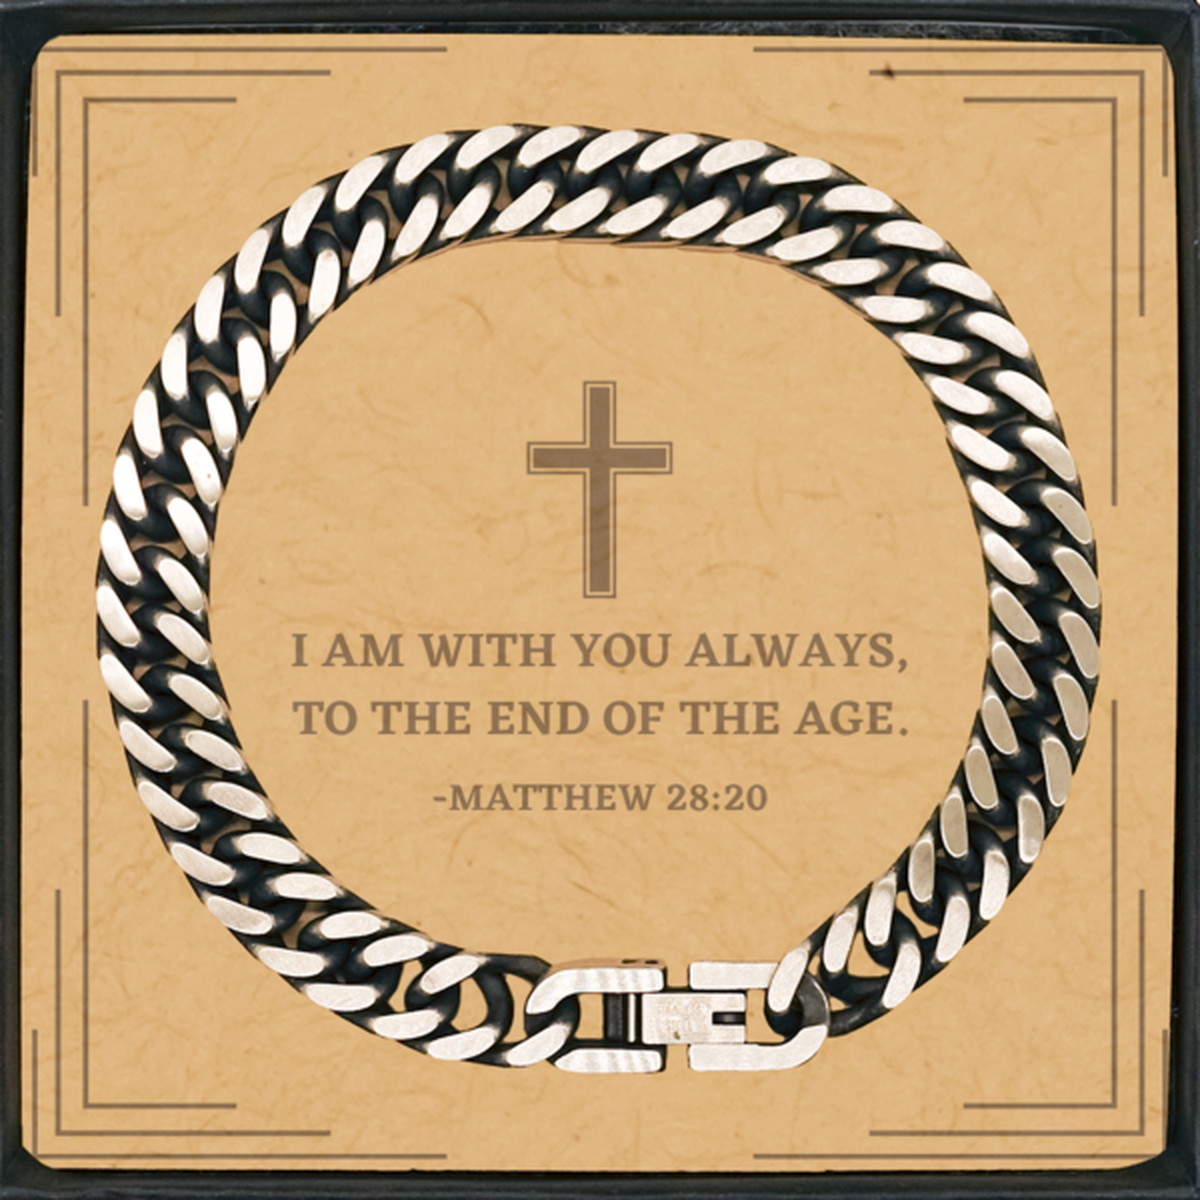 Baptism Gifts For Teenage Boys Girls, Christian Bible Verse Cuban Link Chain Bracelet, I am with you always, Confirmation Gifts, Bible Verse Card for Son, Godson, Grandson